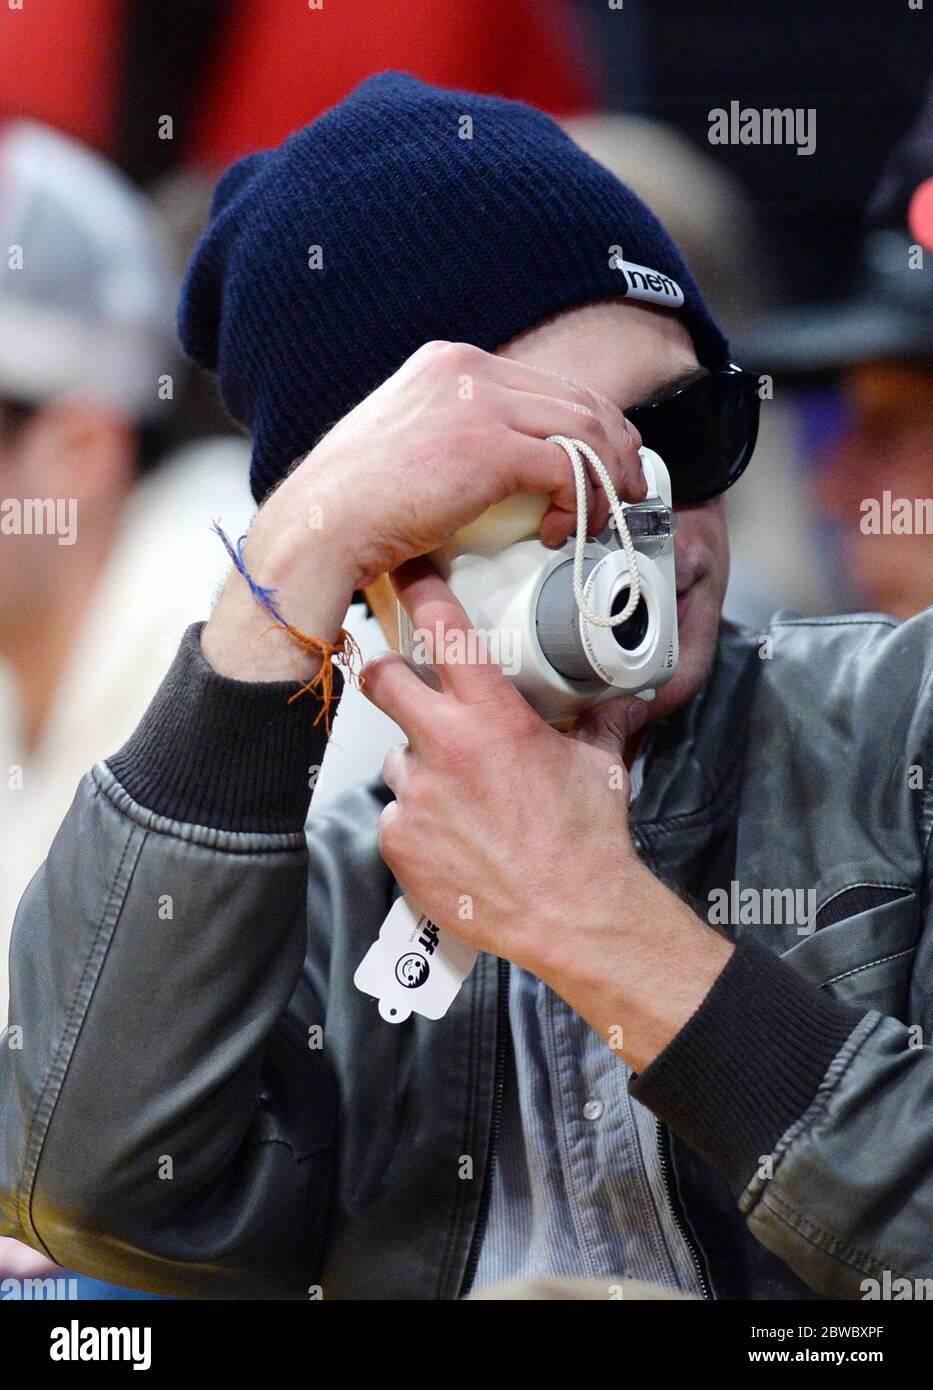 Zac Efron wearing beanie, holding camera at LA Lakers NBA game, December 2014 Stock Photo